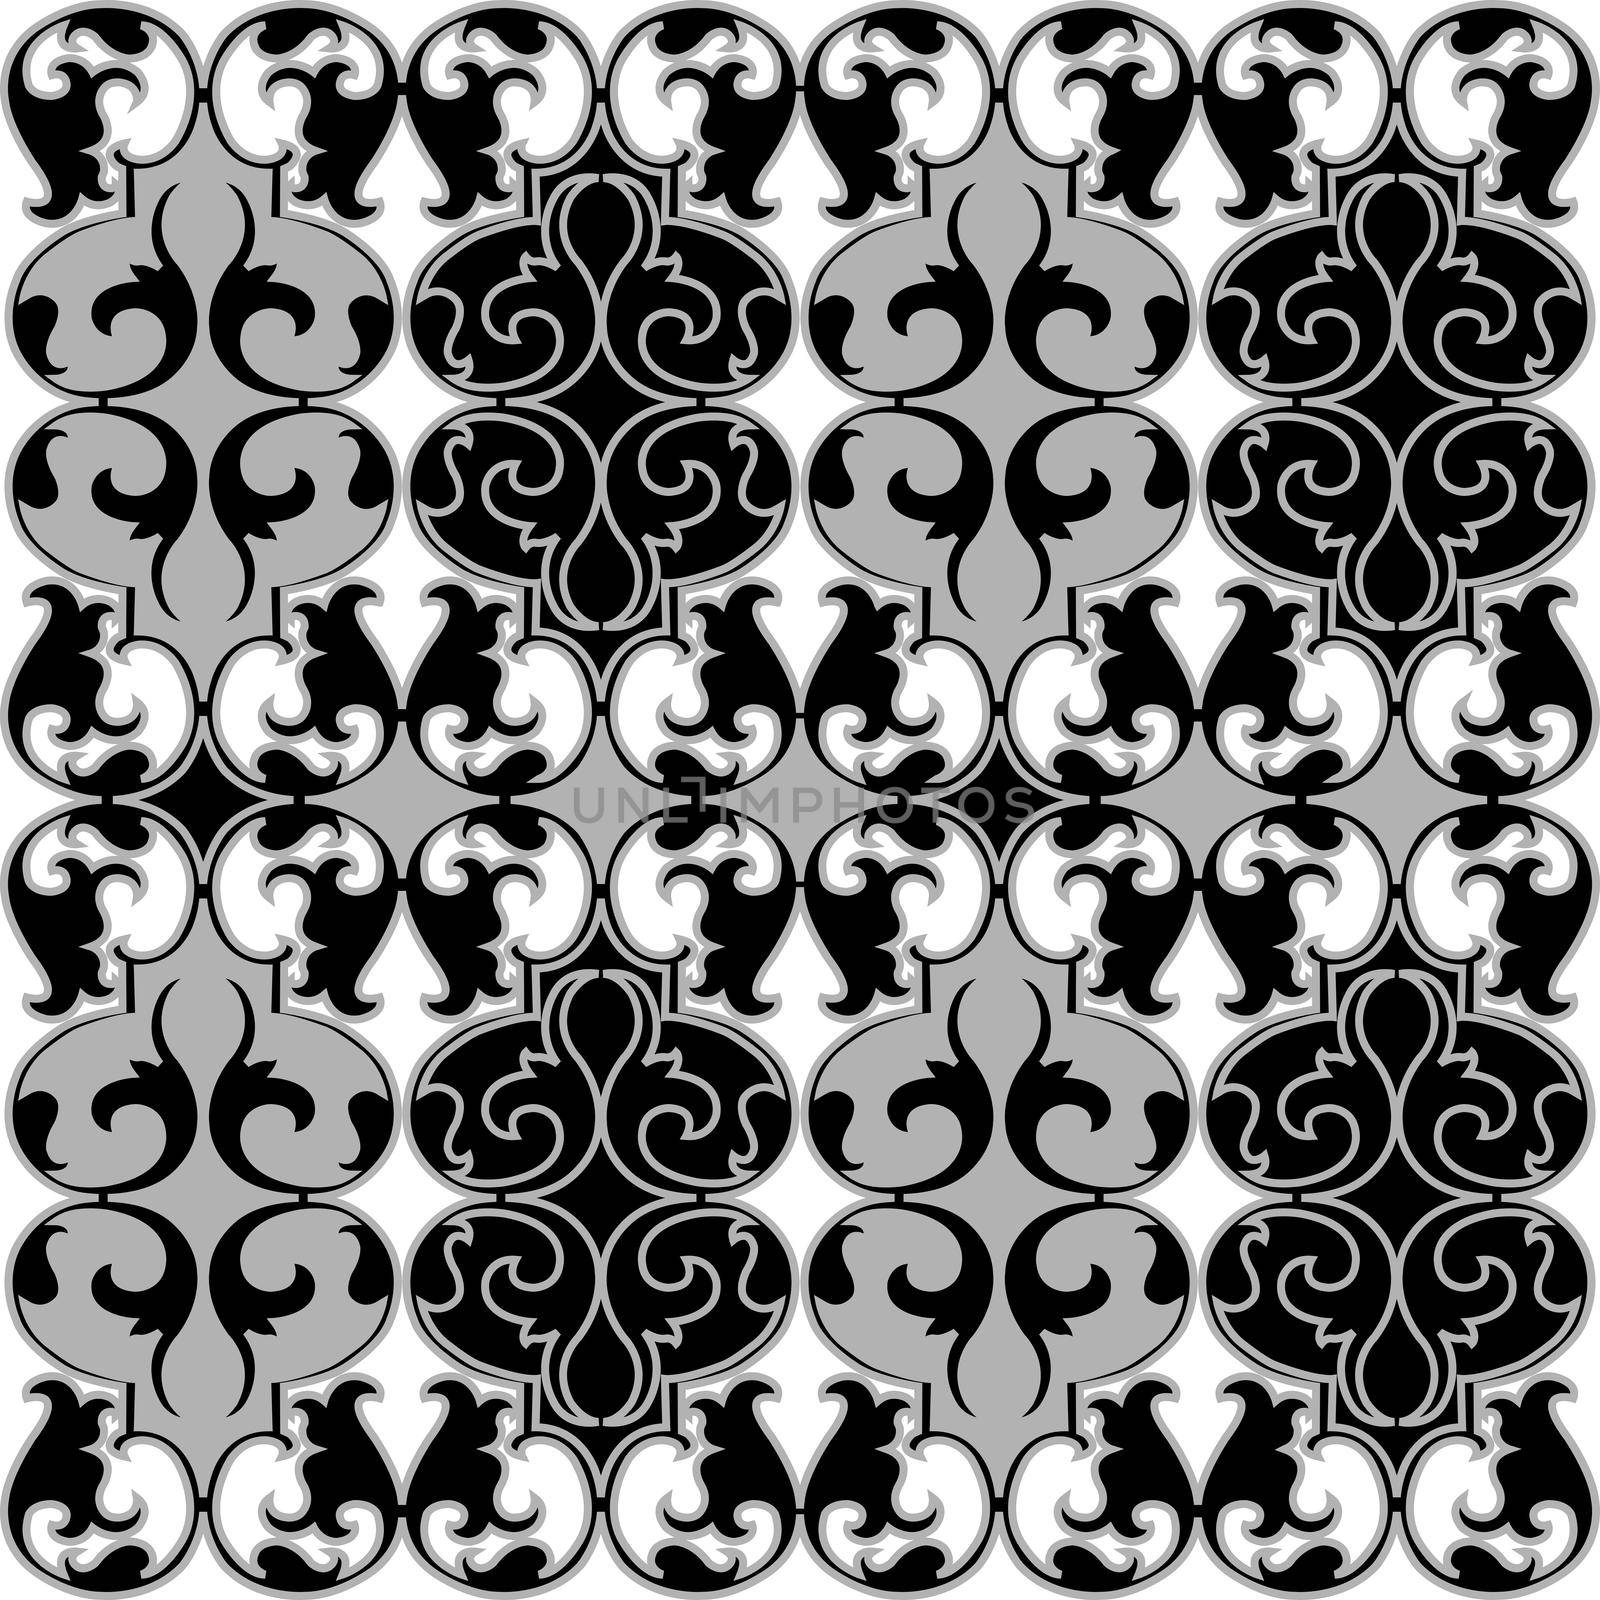 Black and white damask tapestry with floral pattern by hibrida13